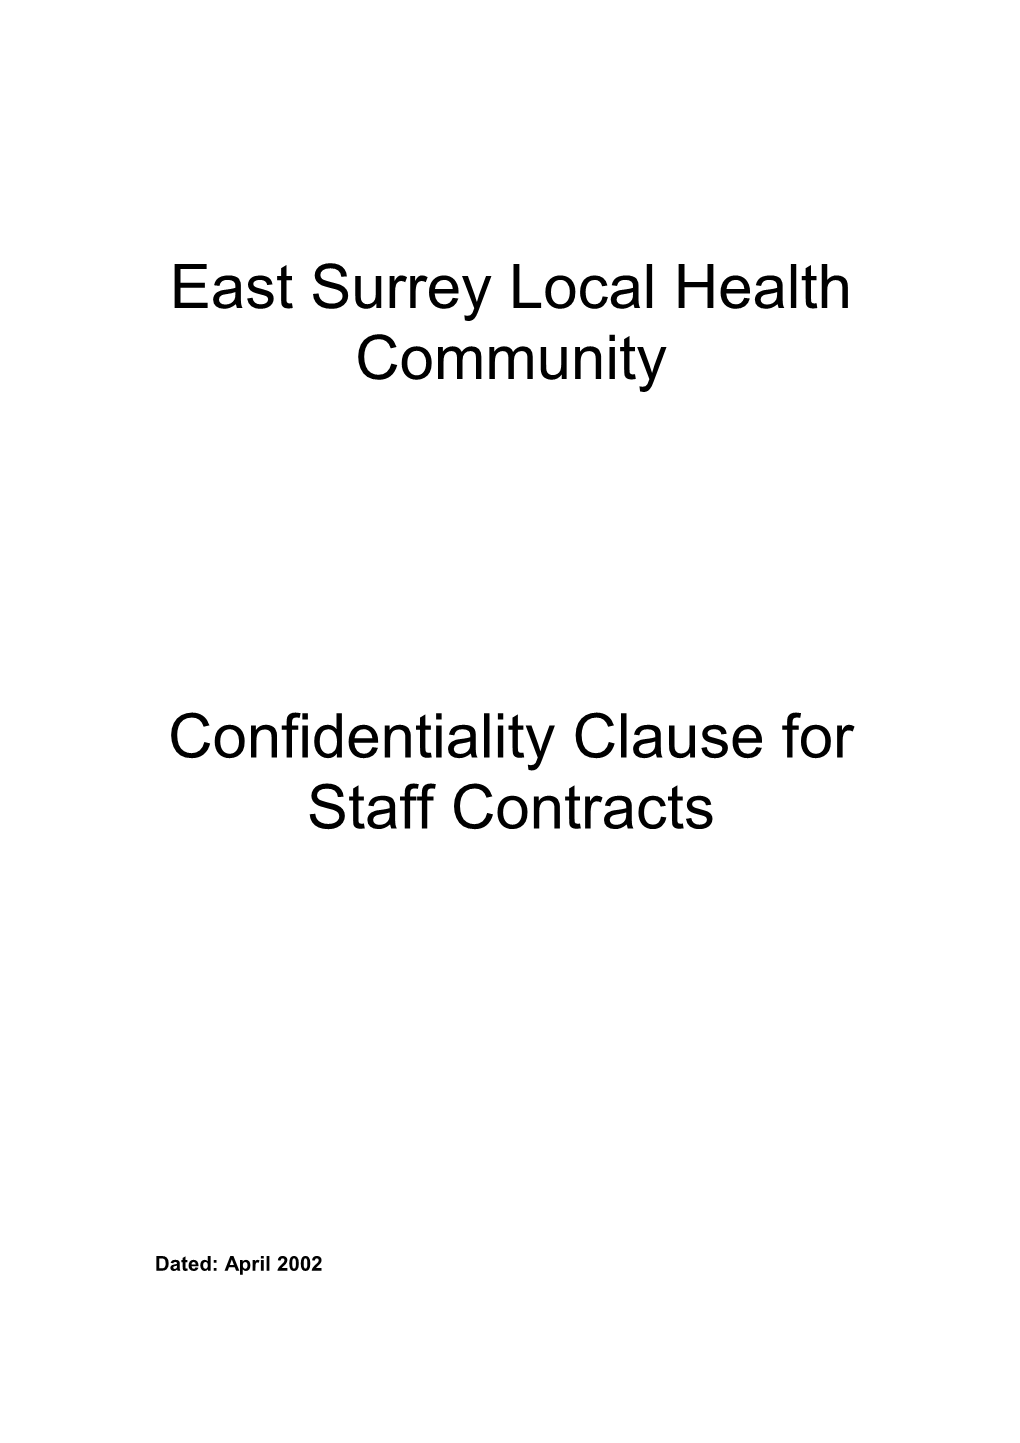 DRAFT Confidentiality Clause for Staff Contracts